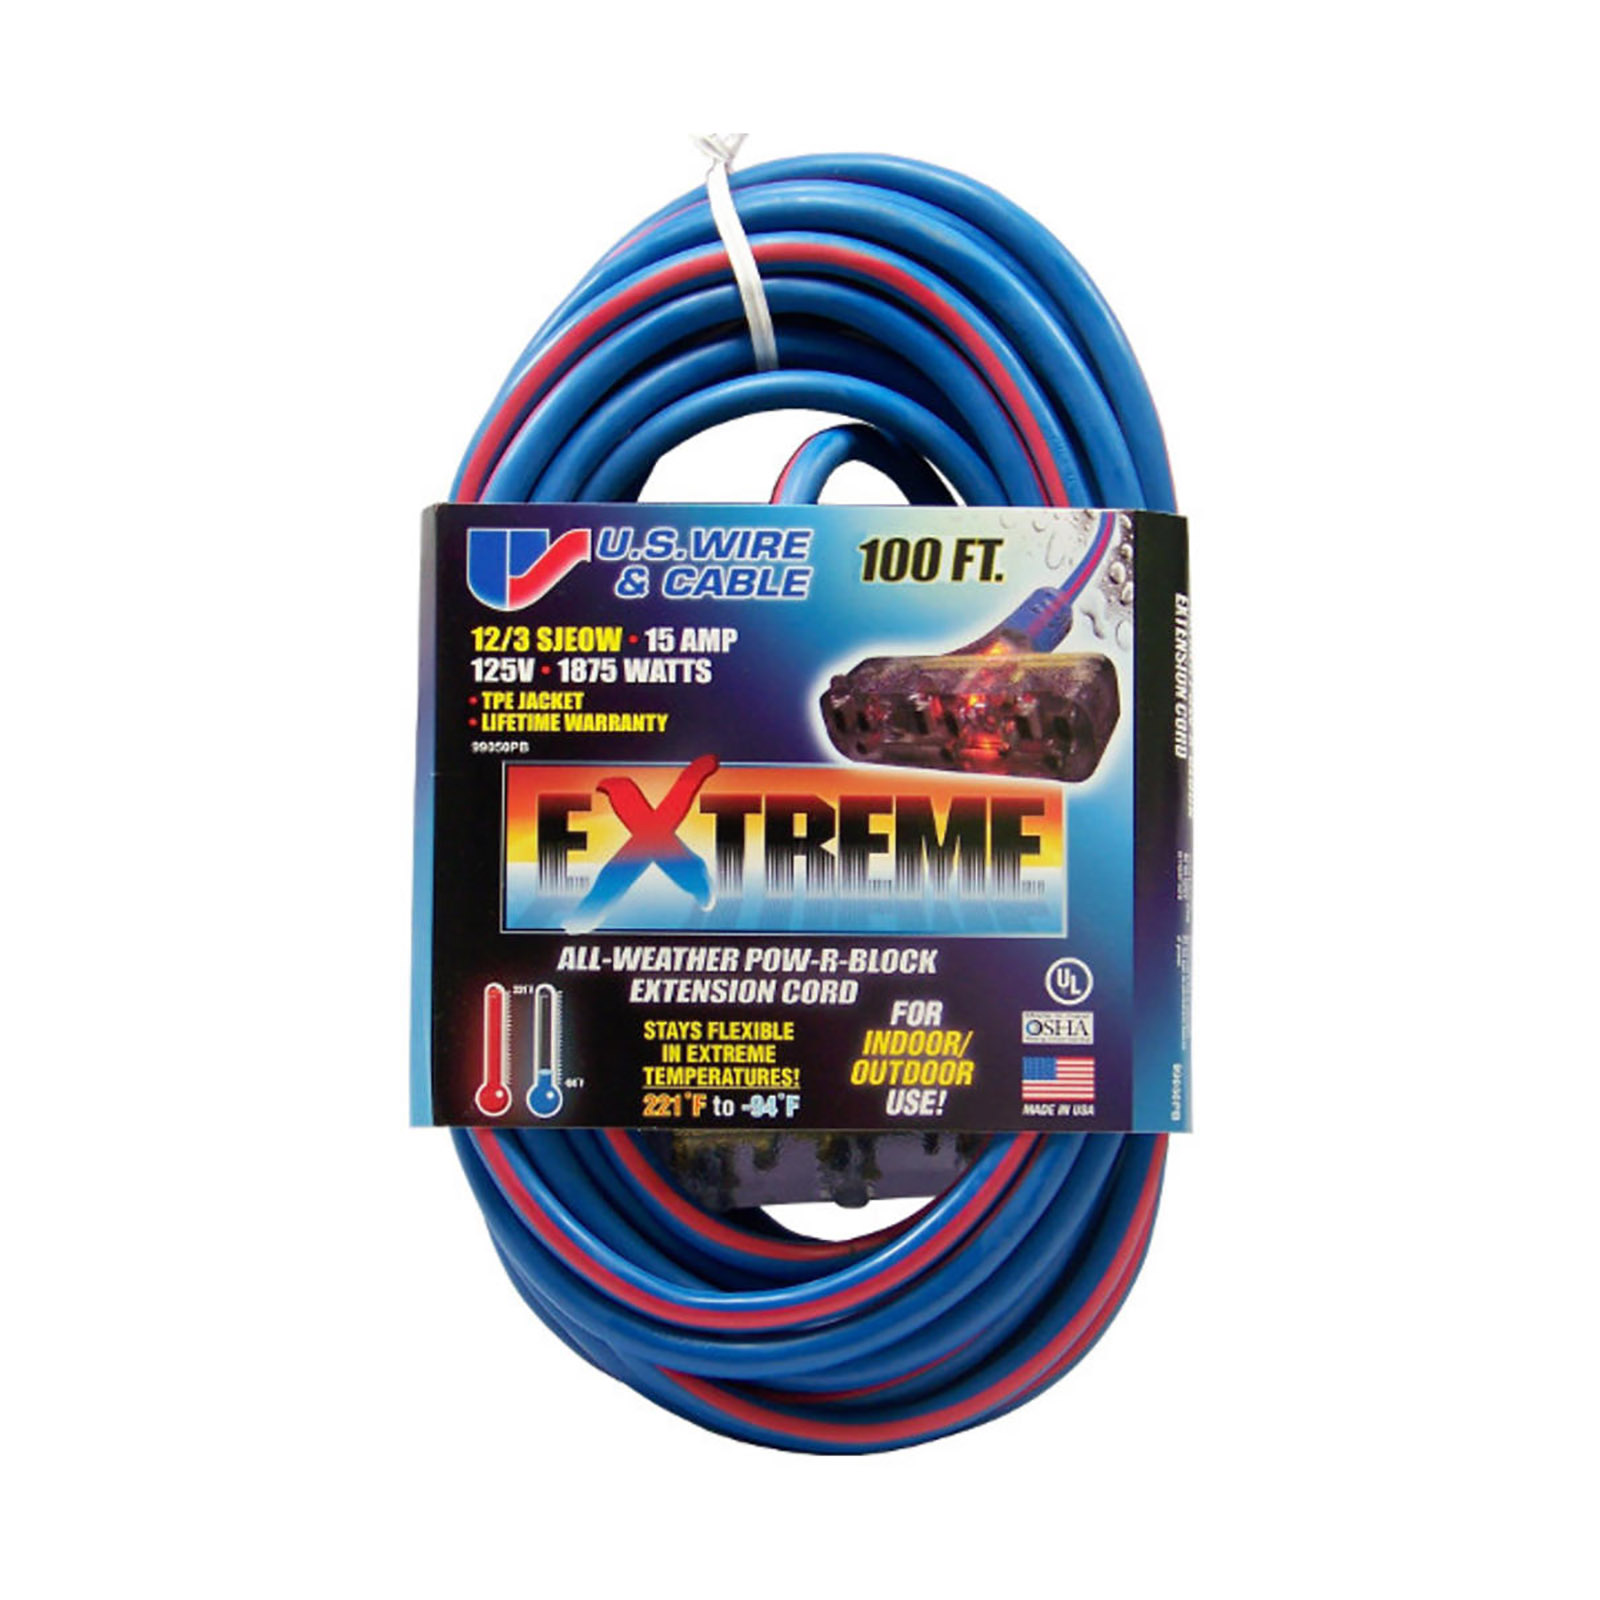 US WIRE & CABLE Extreme 100' Triple Outlet Extension Cord - Blue and Red